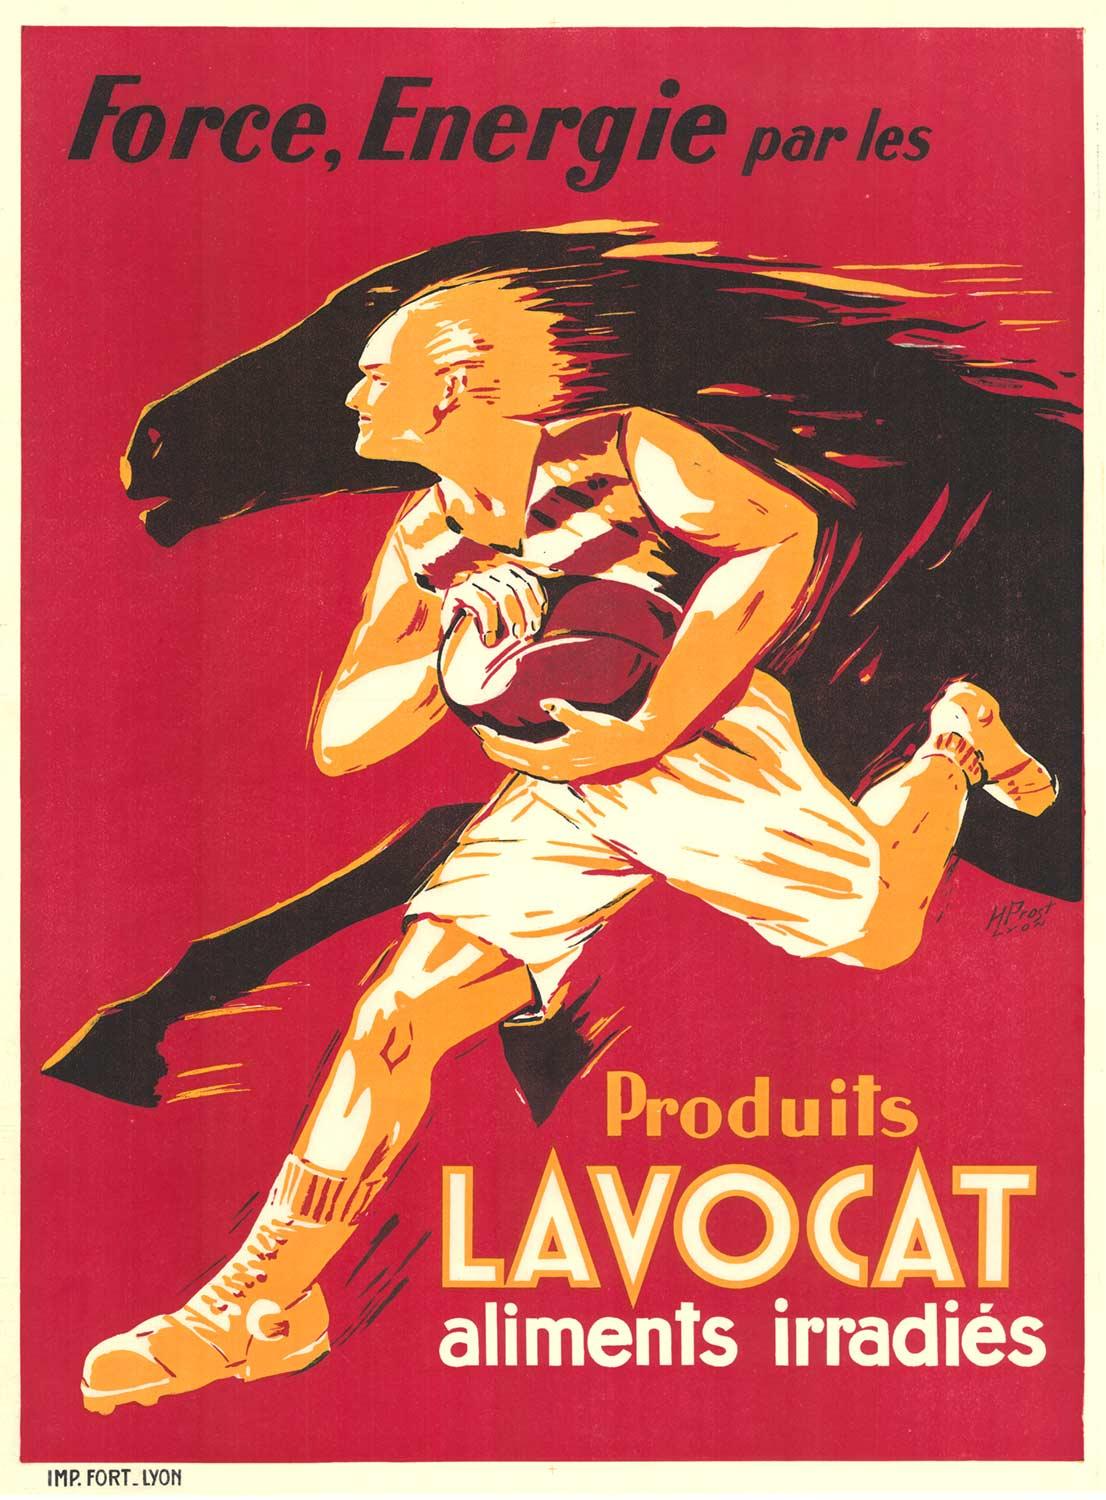 H. Prost Animal Print - Original 'Produits Lavocat' vintage poster for Force and Energy